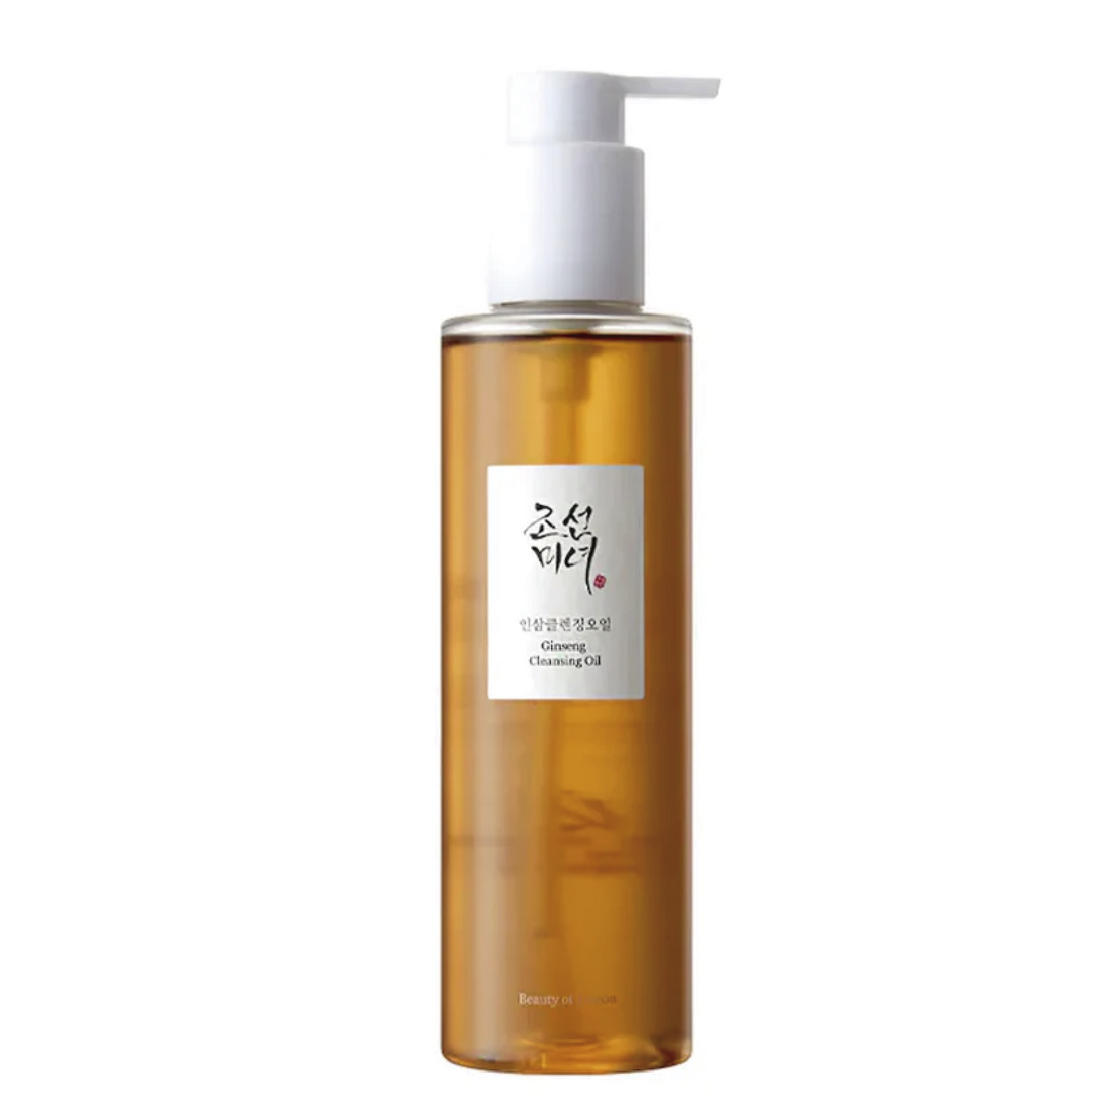 Beauty of joseon | Ginseng Cleansing Oil